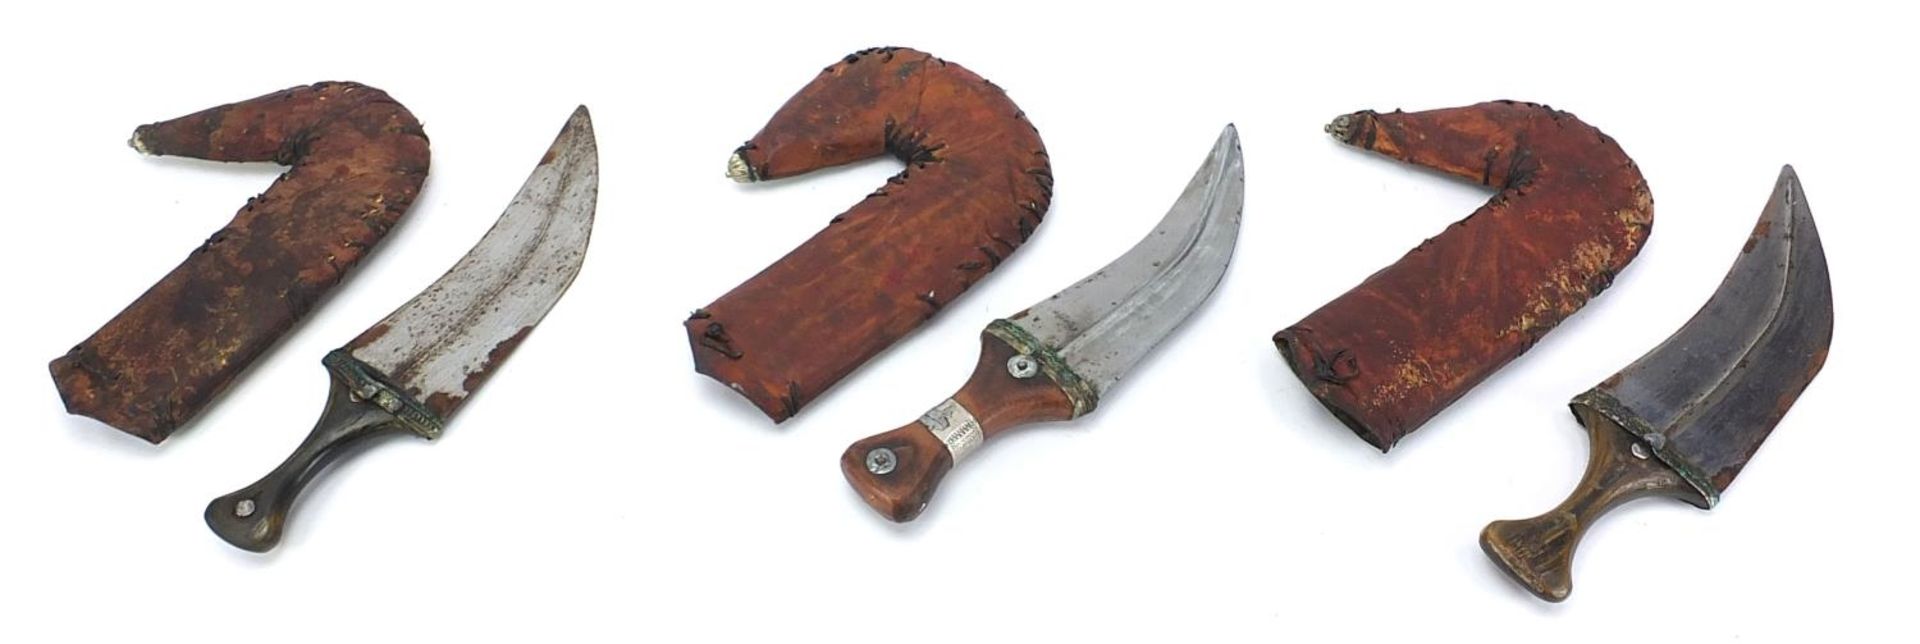 Three Islamic jambiya daggers with horn handles, leather sheaths and white metal mounts, each - Image 4 of 5